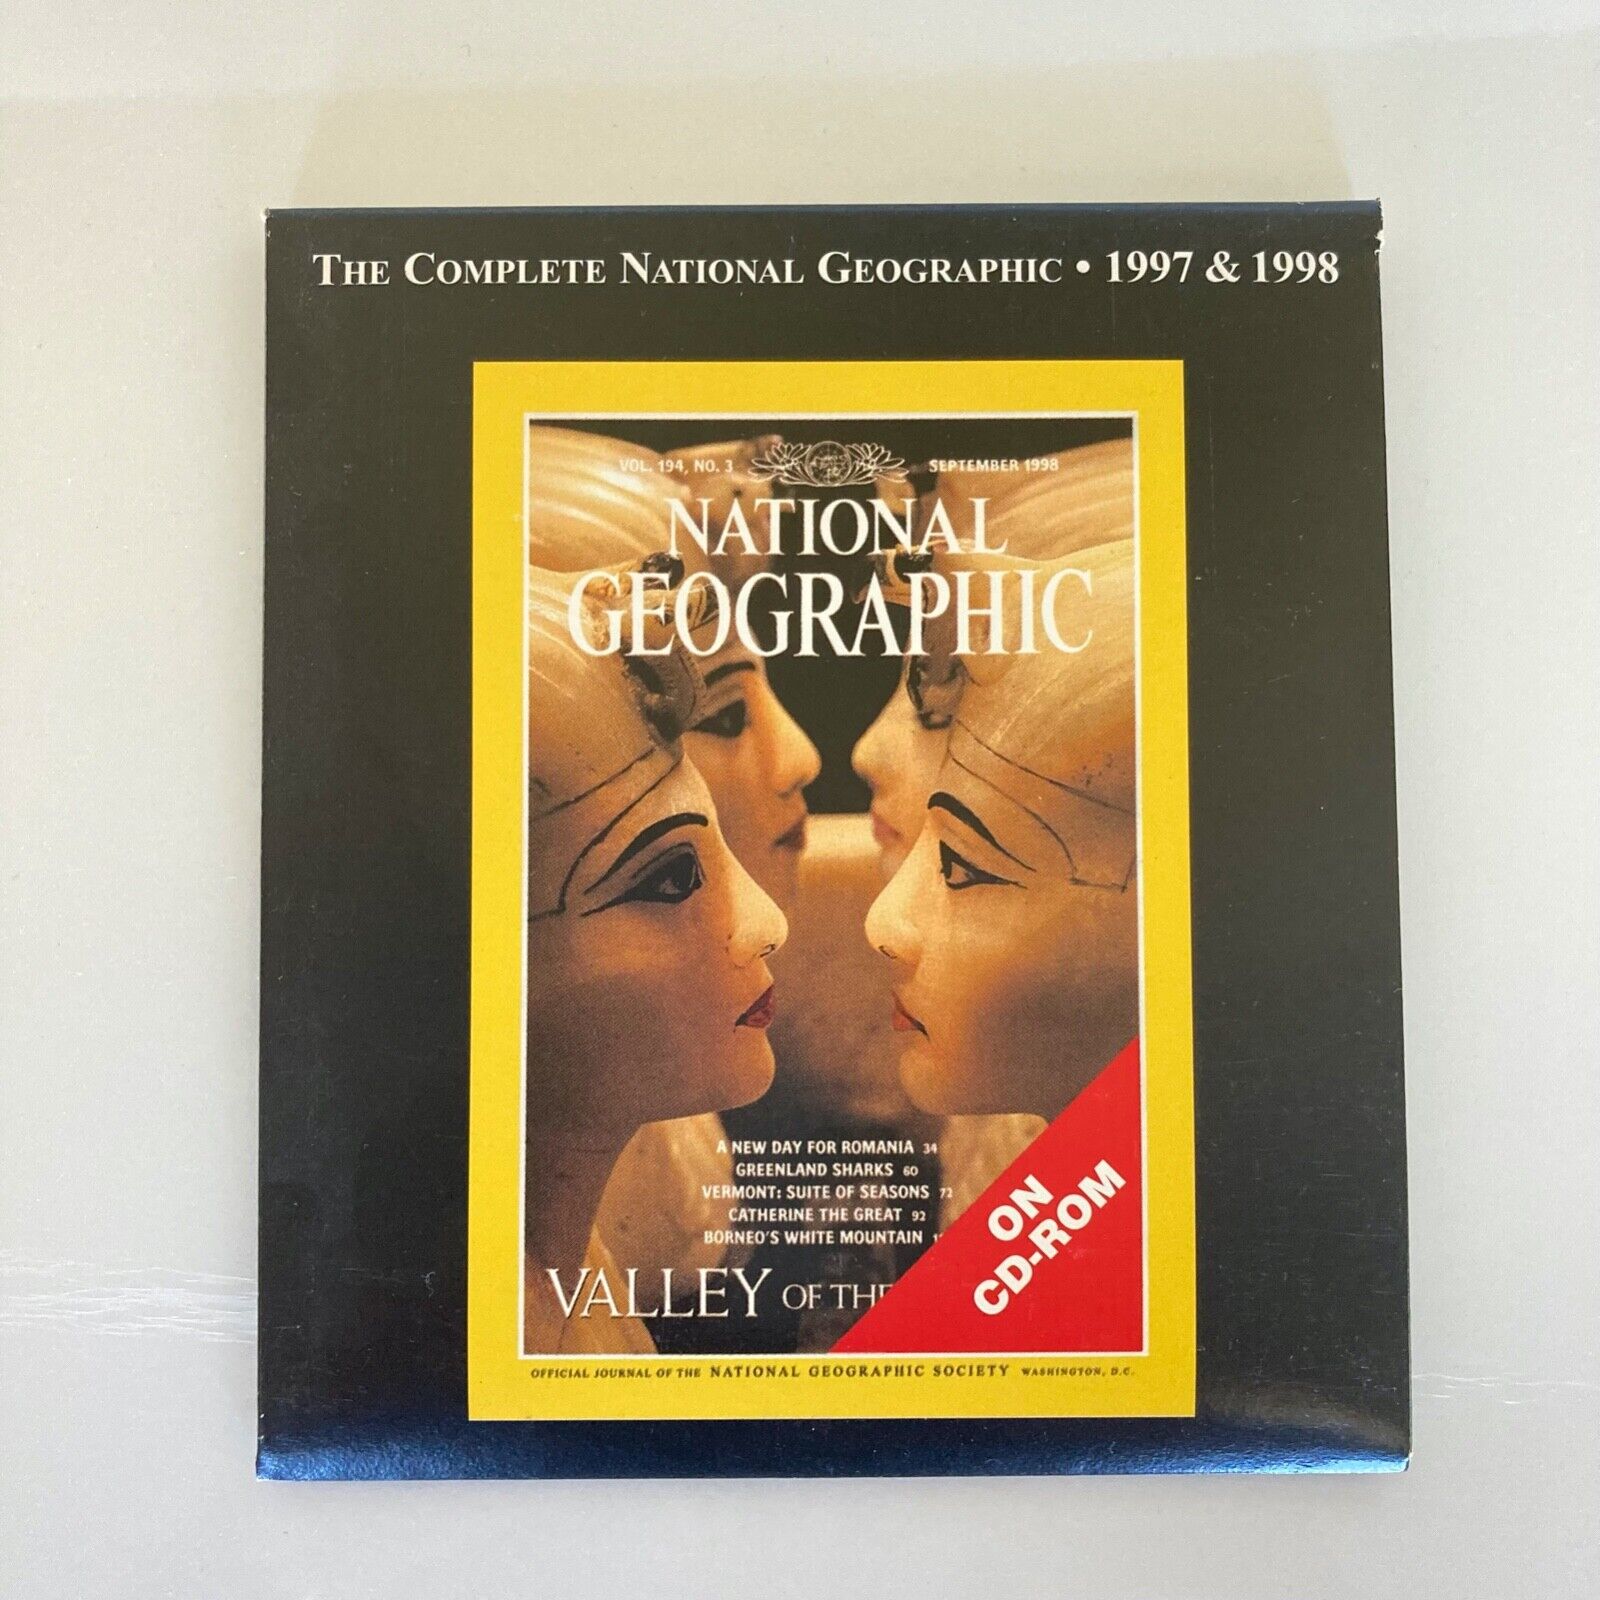 The Complete National Geographic 1997 & 1998 CD      BRAND NEW